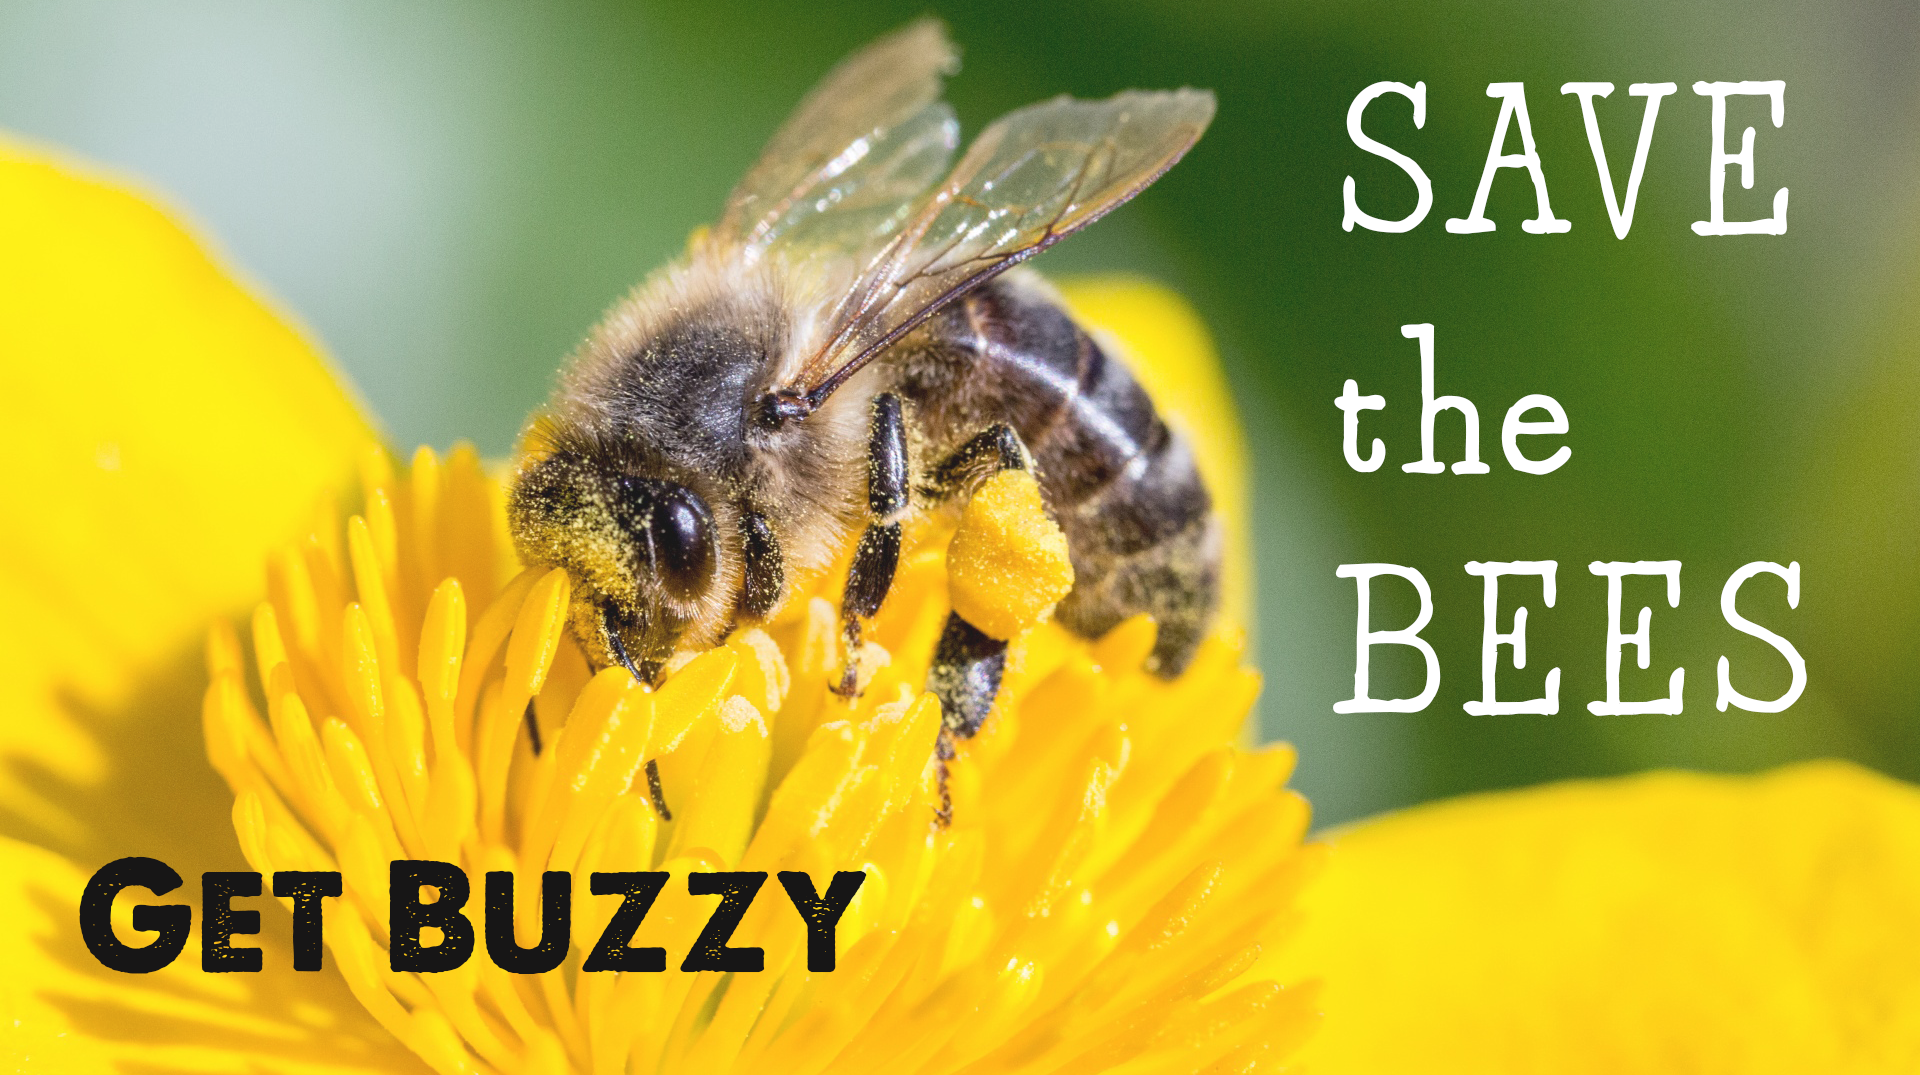 Save the Bees... Get Buzzy